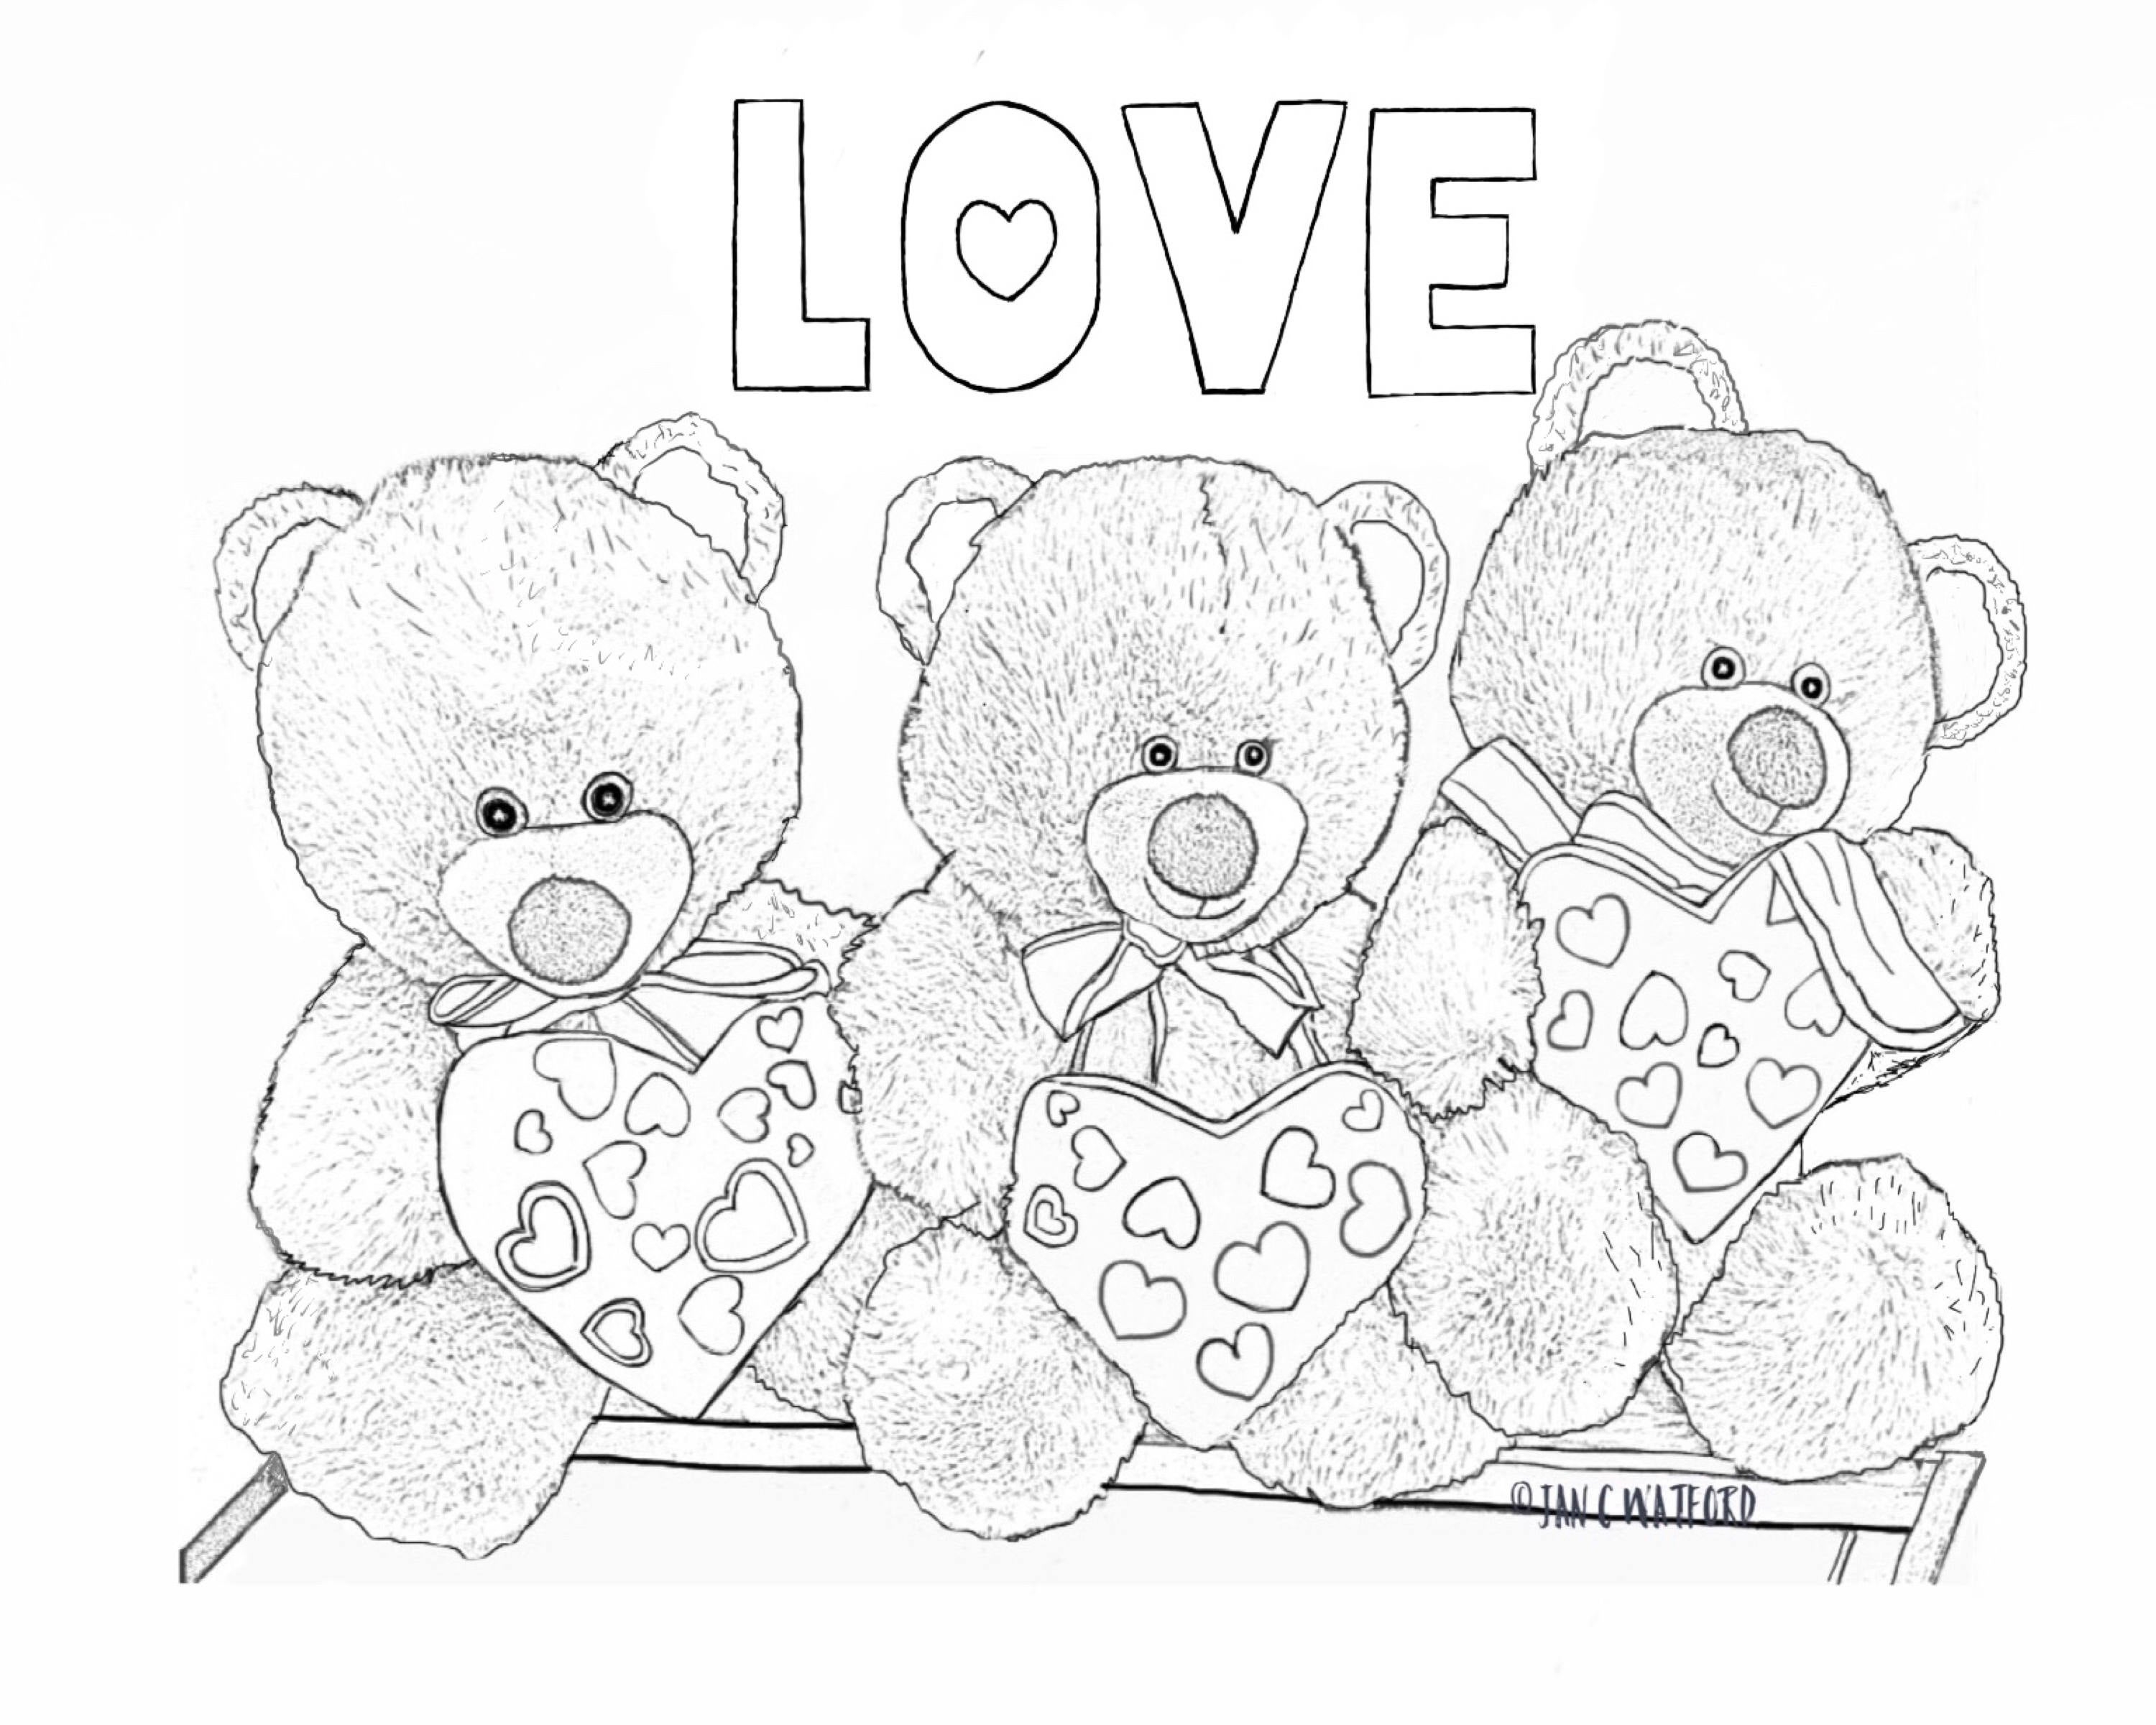 Valentine Teddy Bear Coloring Pages Valentine Teddy Bears Adult Coloring Pages Coloring Page Gray Scale Printable Digital Download Adult Coloring Kids Coloring Page